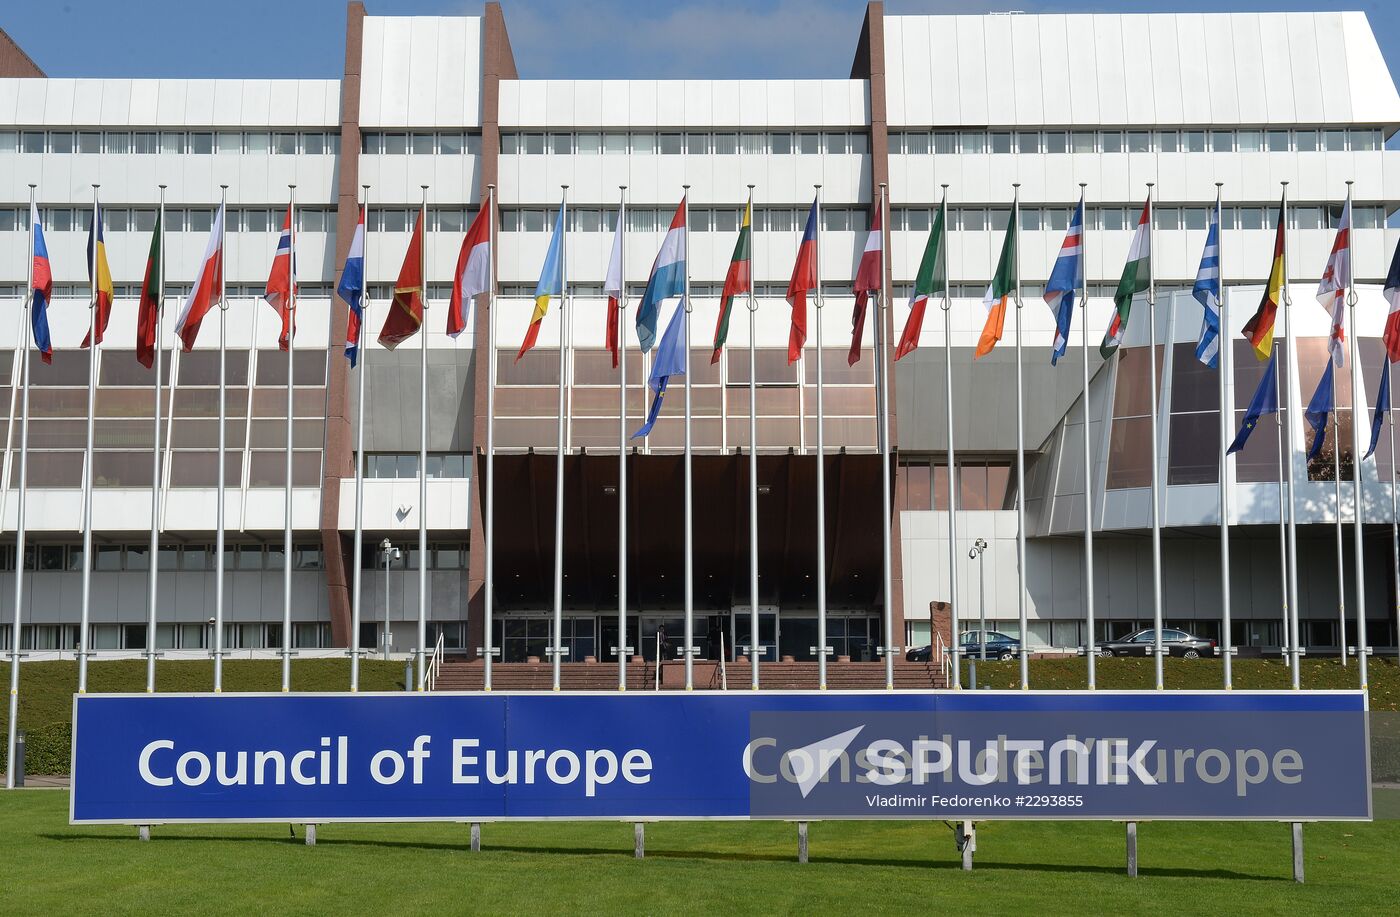 Building of Council of Europe in Strasbourg